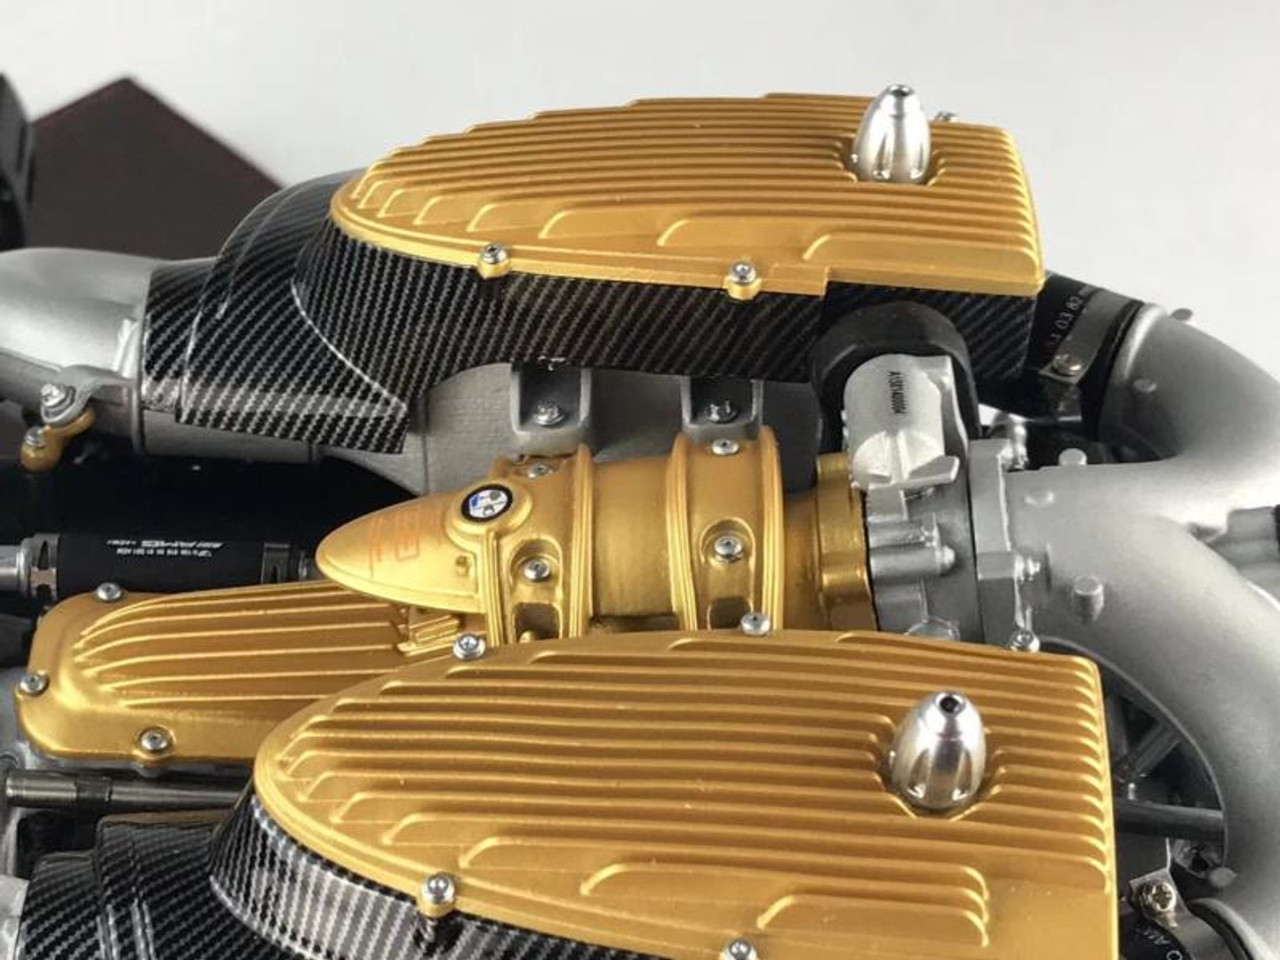 1/6 Frontiart Pagani Huayra Engine Model Limited